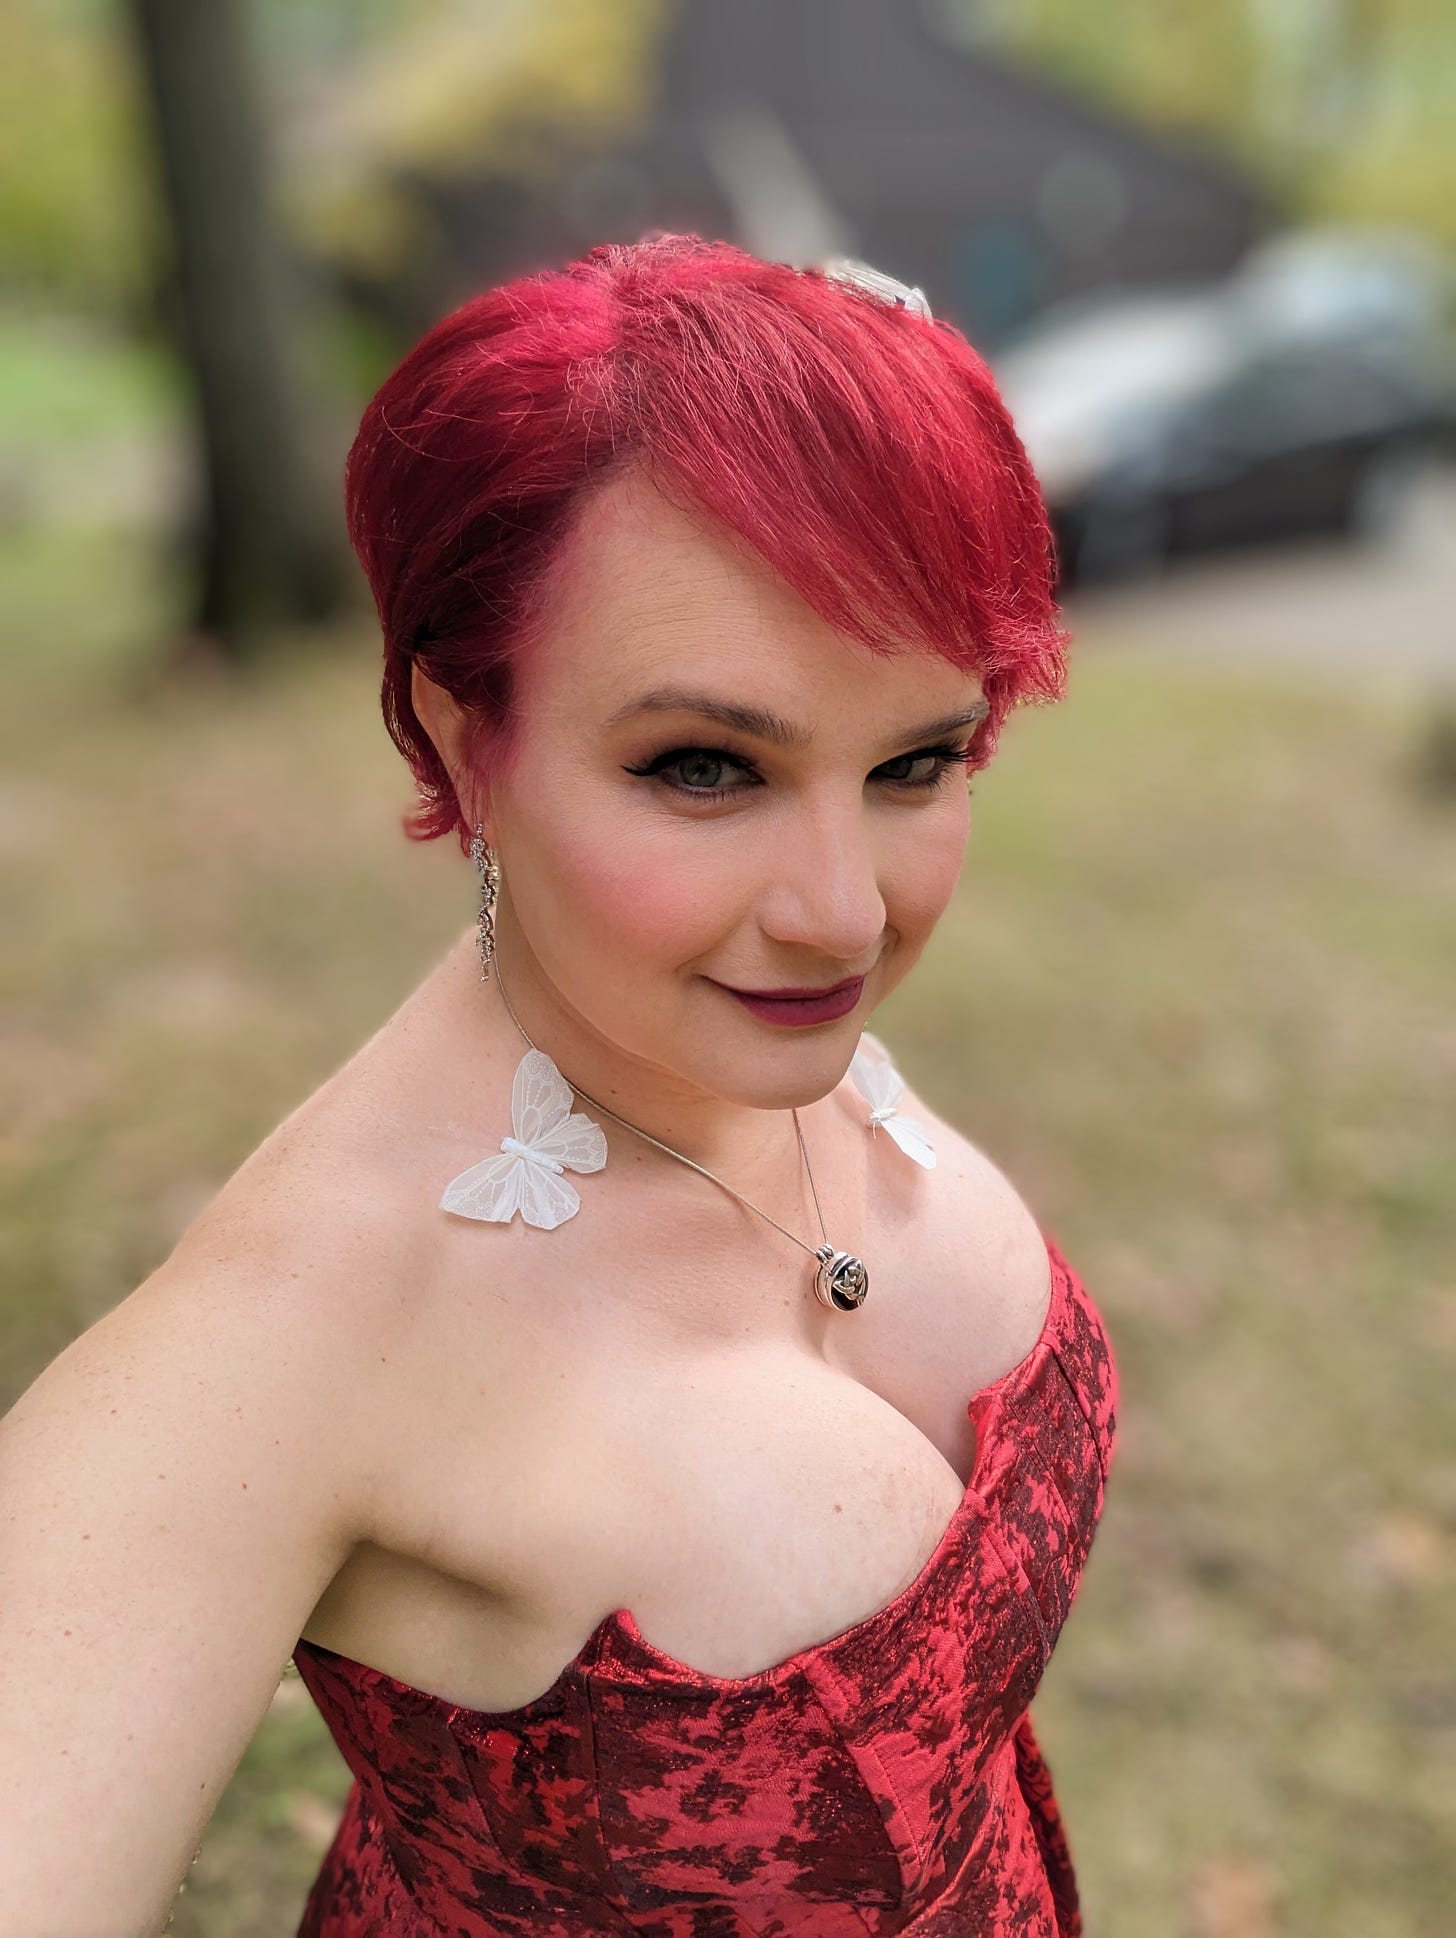 Zoe looks at the camera on her vow renewal day, wearing a red dress that exposes very full breasts and deep, deep cleavage.